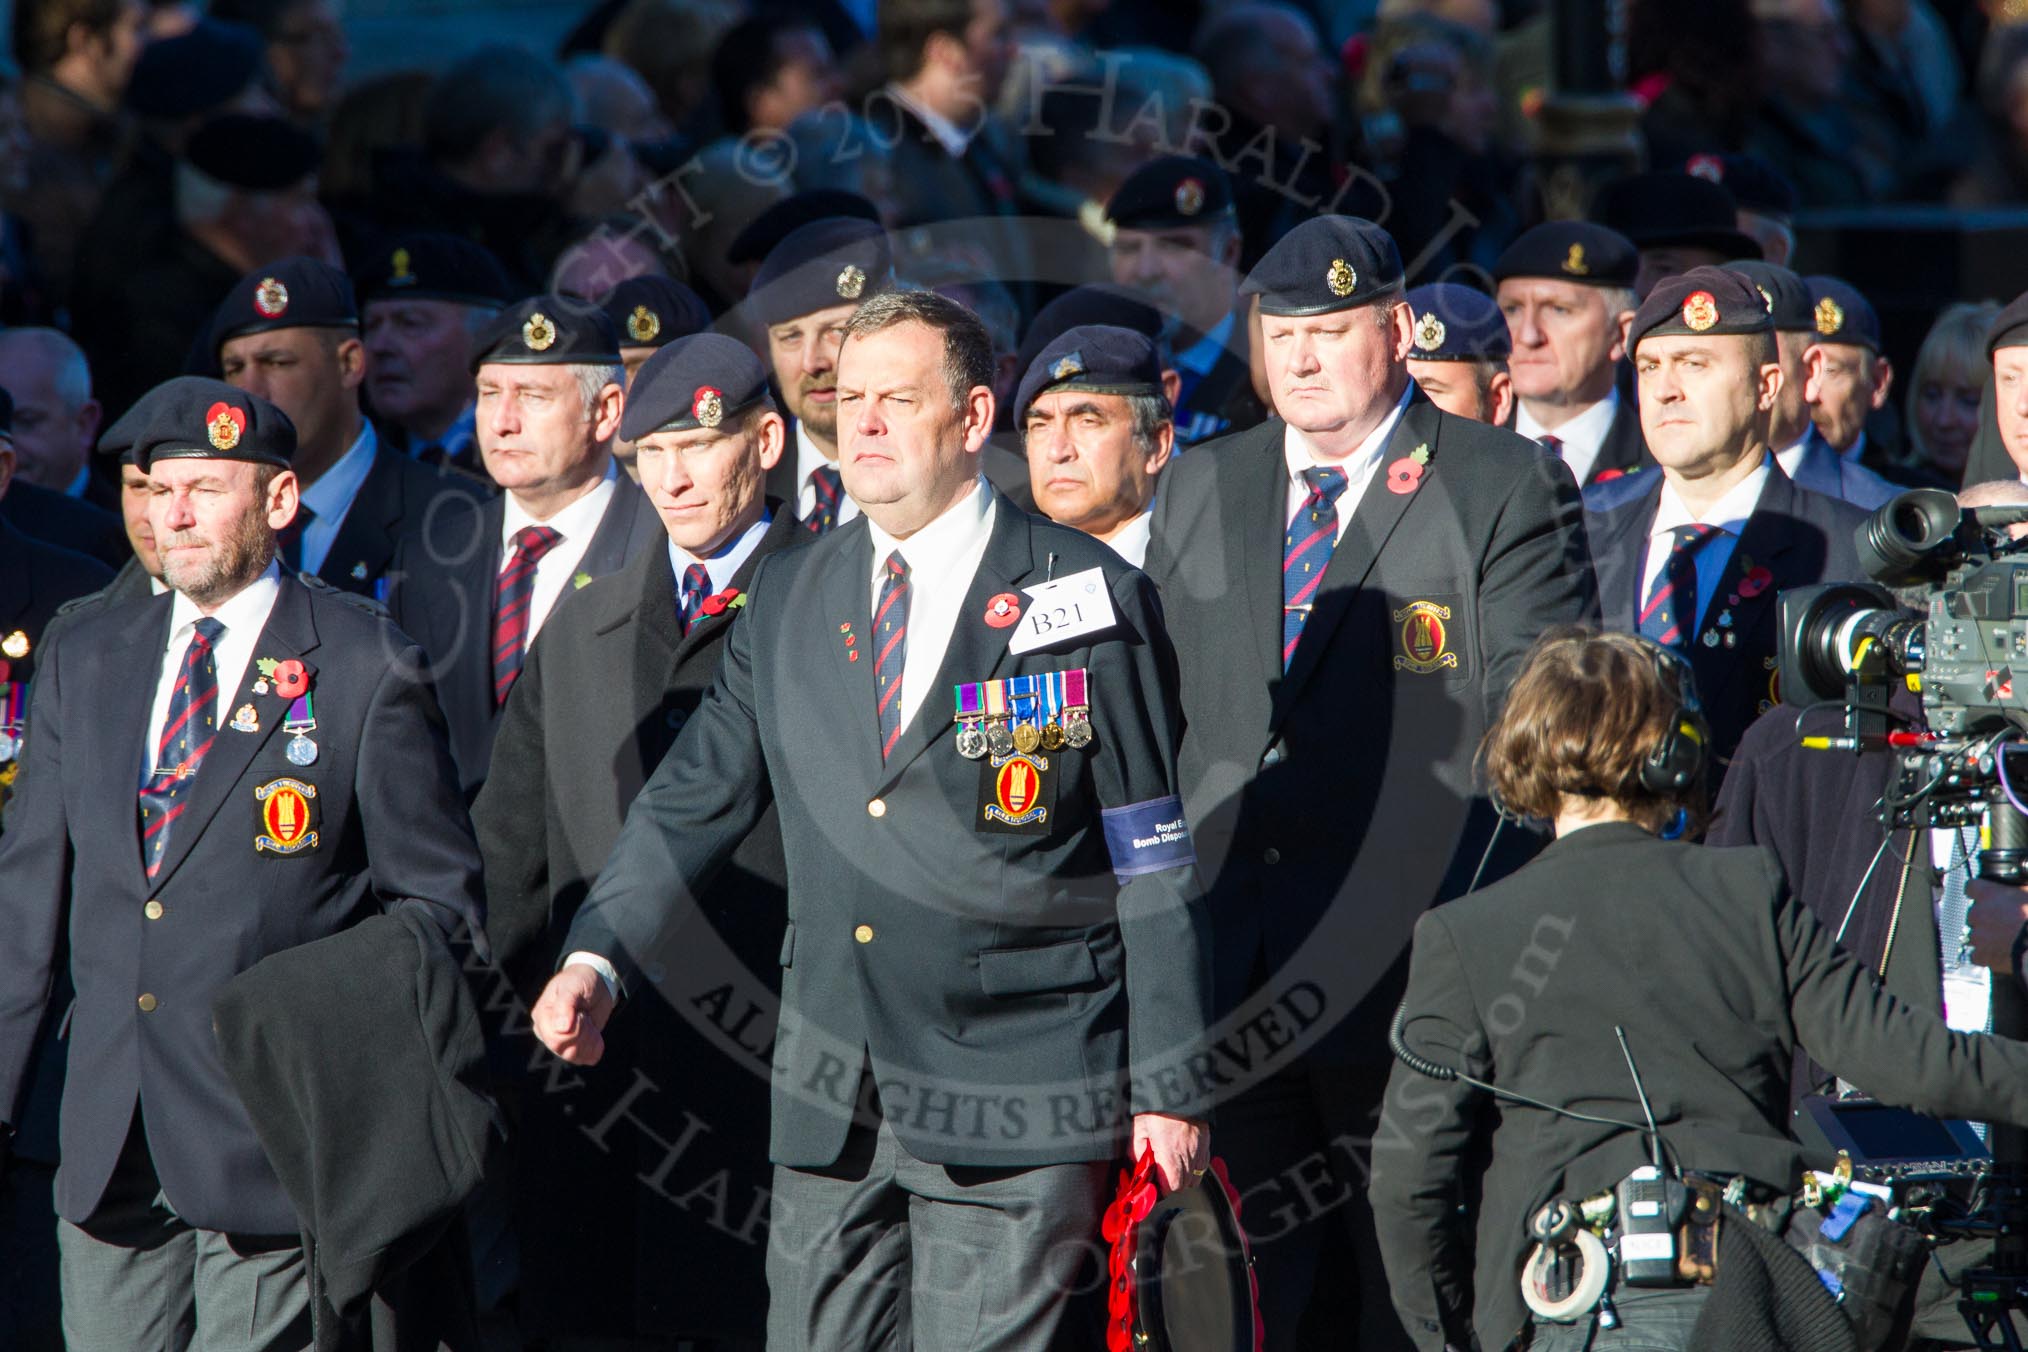 Remembrance Sunday Cenotaph March Past 2013: B21 - Royal Engineers Bomb Disposal Association..
Press stand opposite the Foreign Office building, Whitehall, London SW1,
London,
Greater London,
United Kingdom,
on 10 November 2013 at 12:02, image #1473